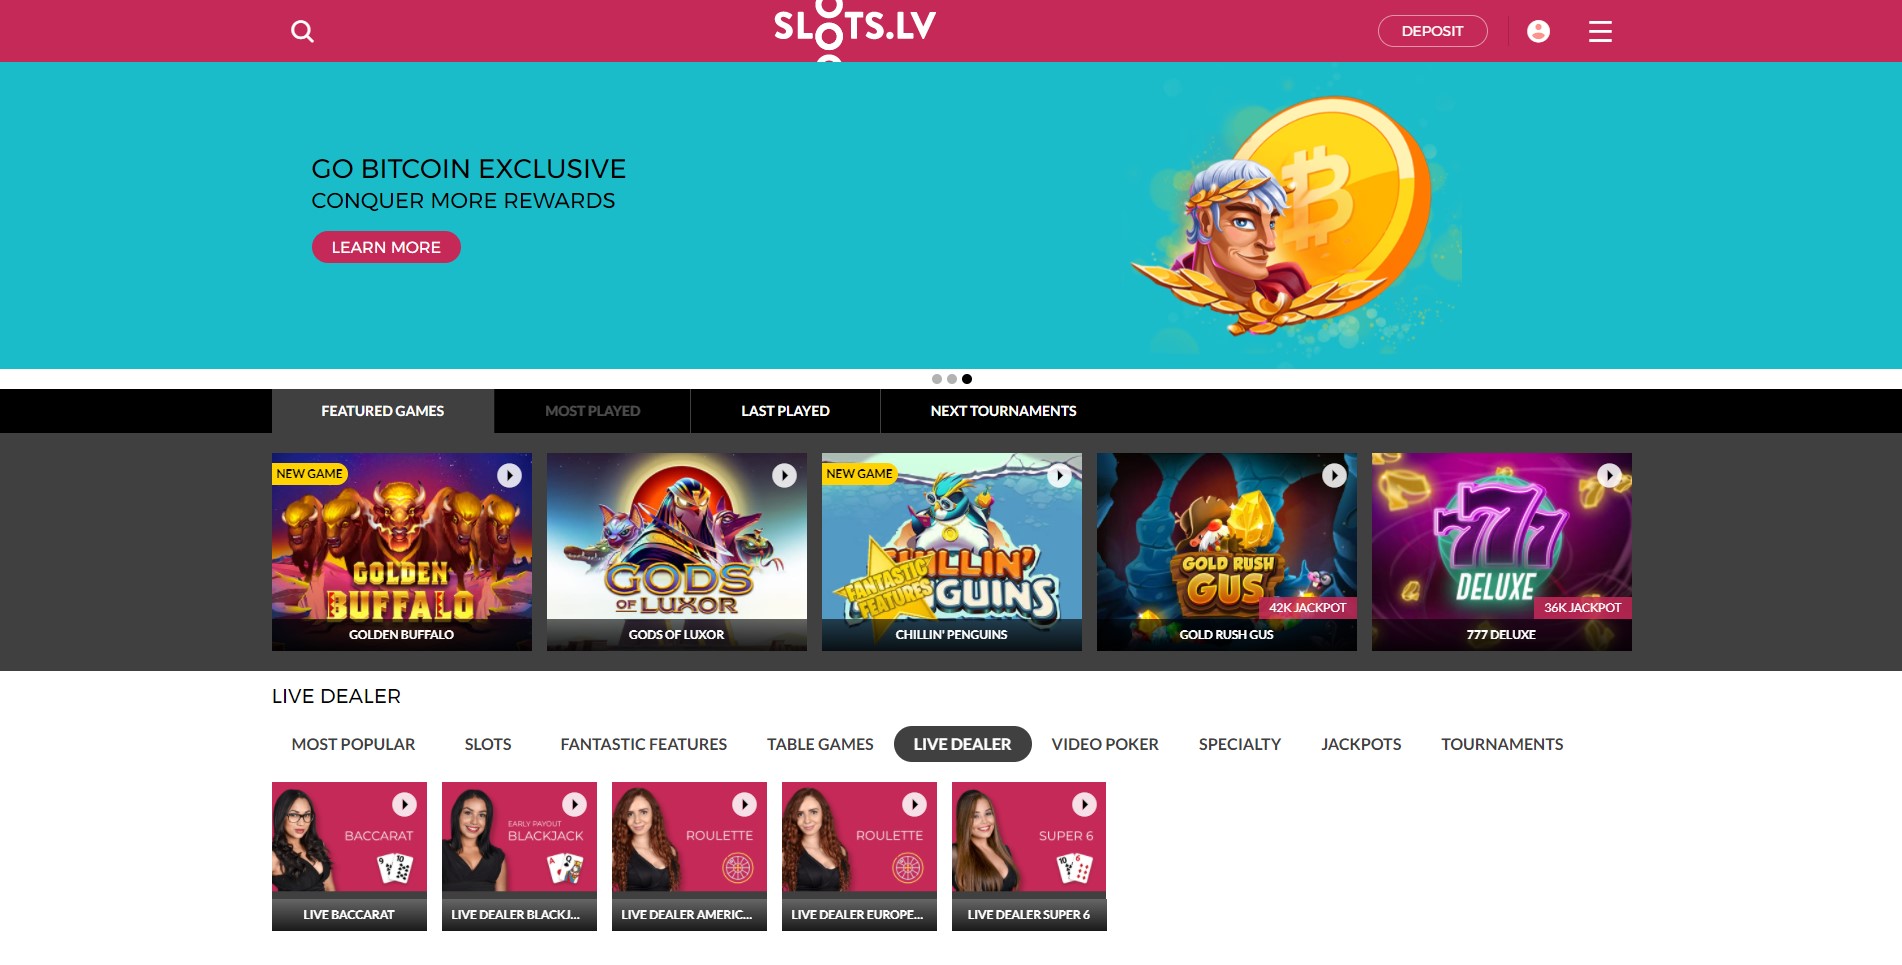 Featured games of Slots.lv casino